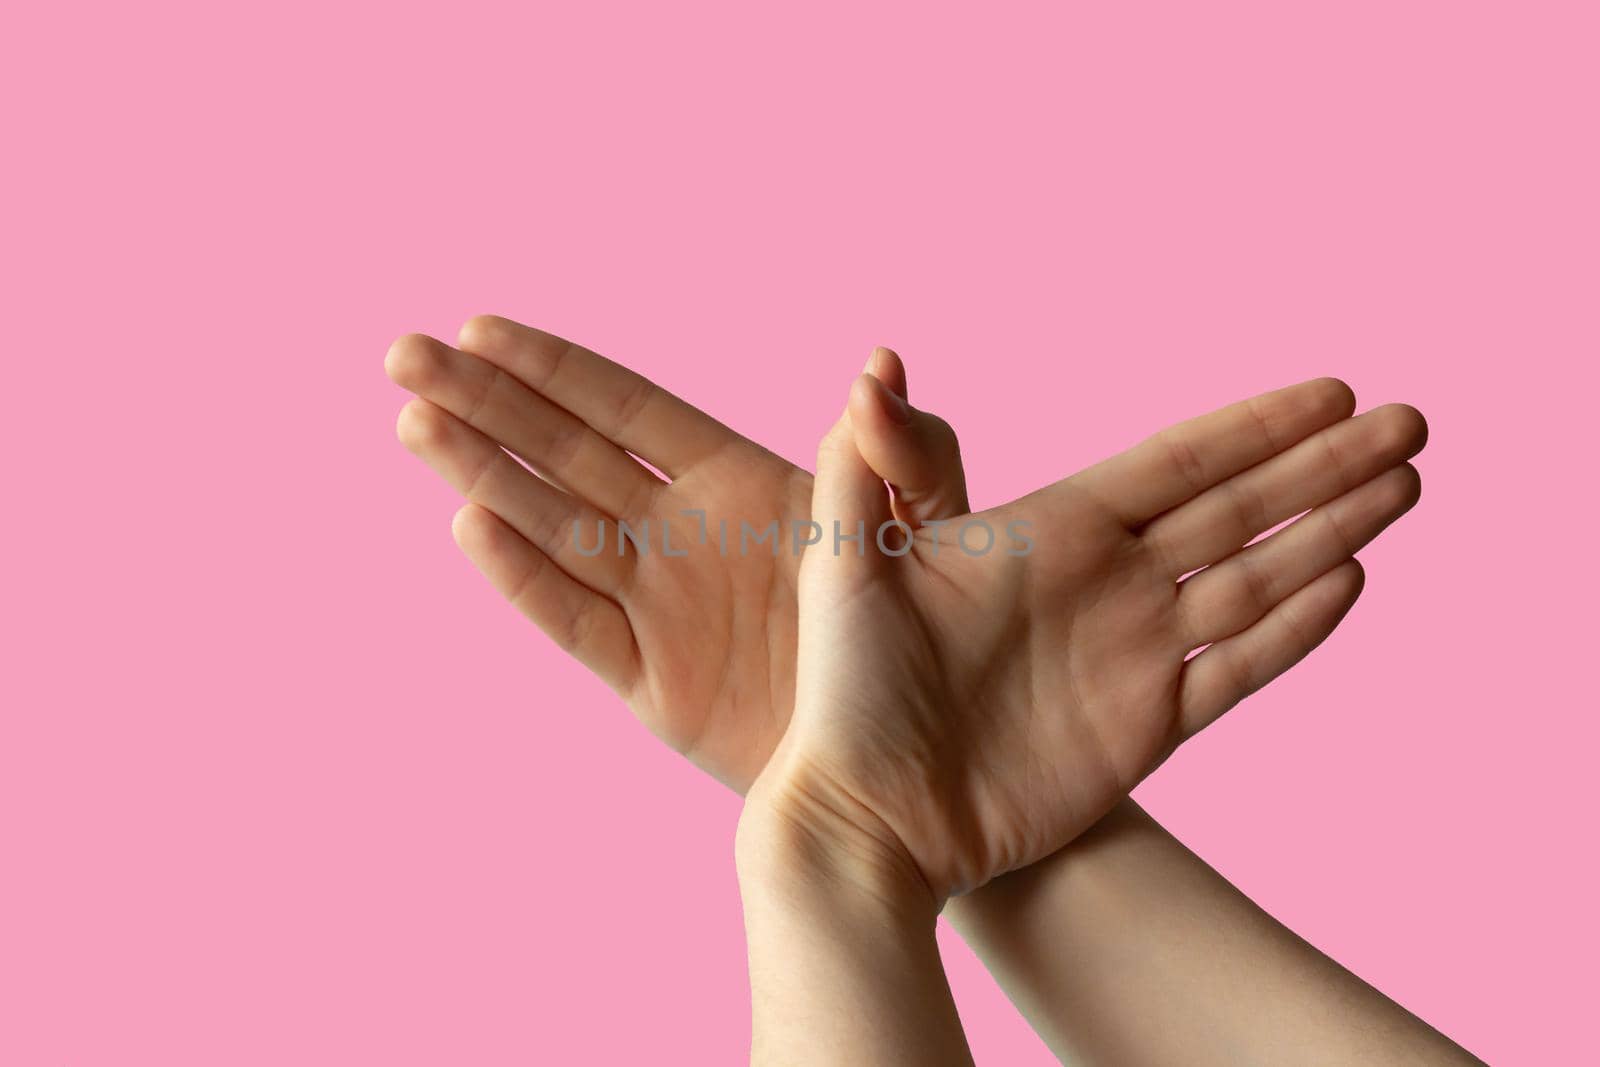 Silhouette of a hand gesture similar to a bird flying on a pink background by lapushka62